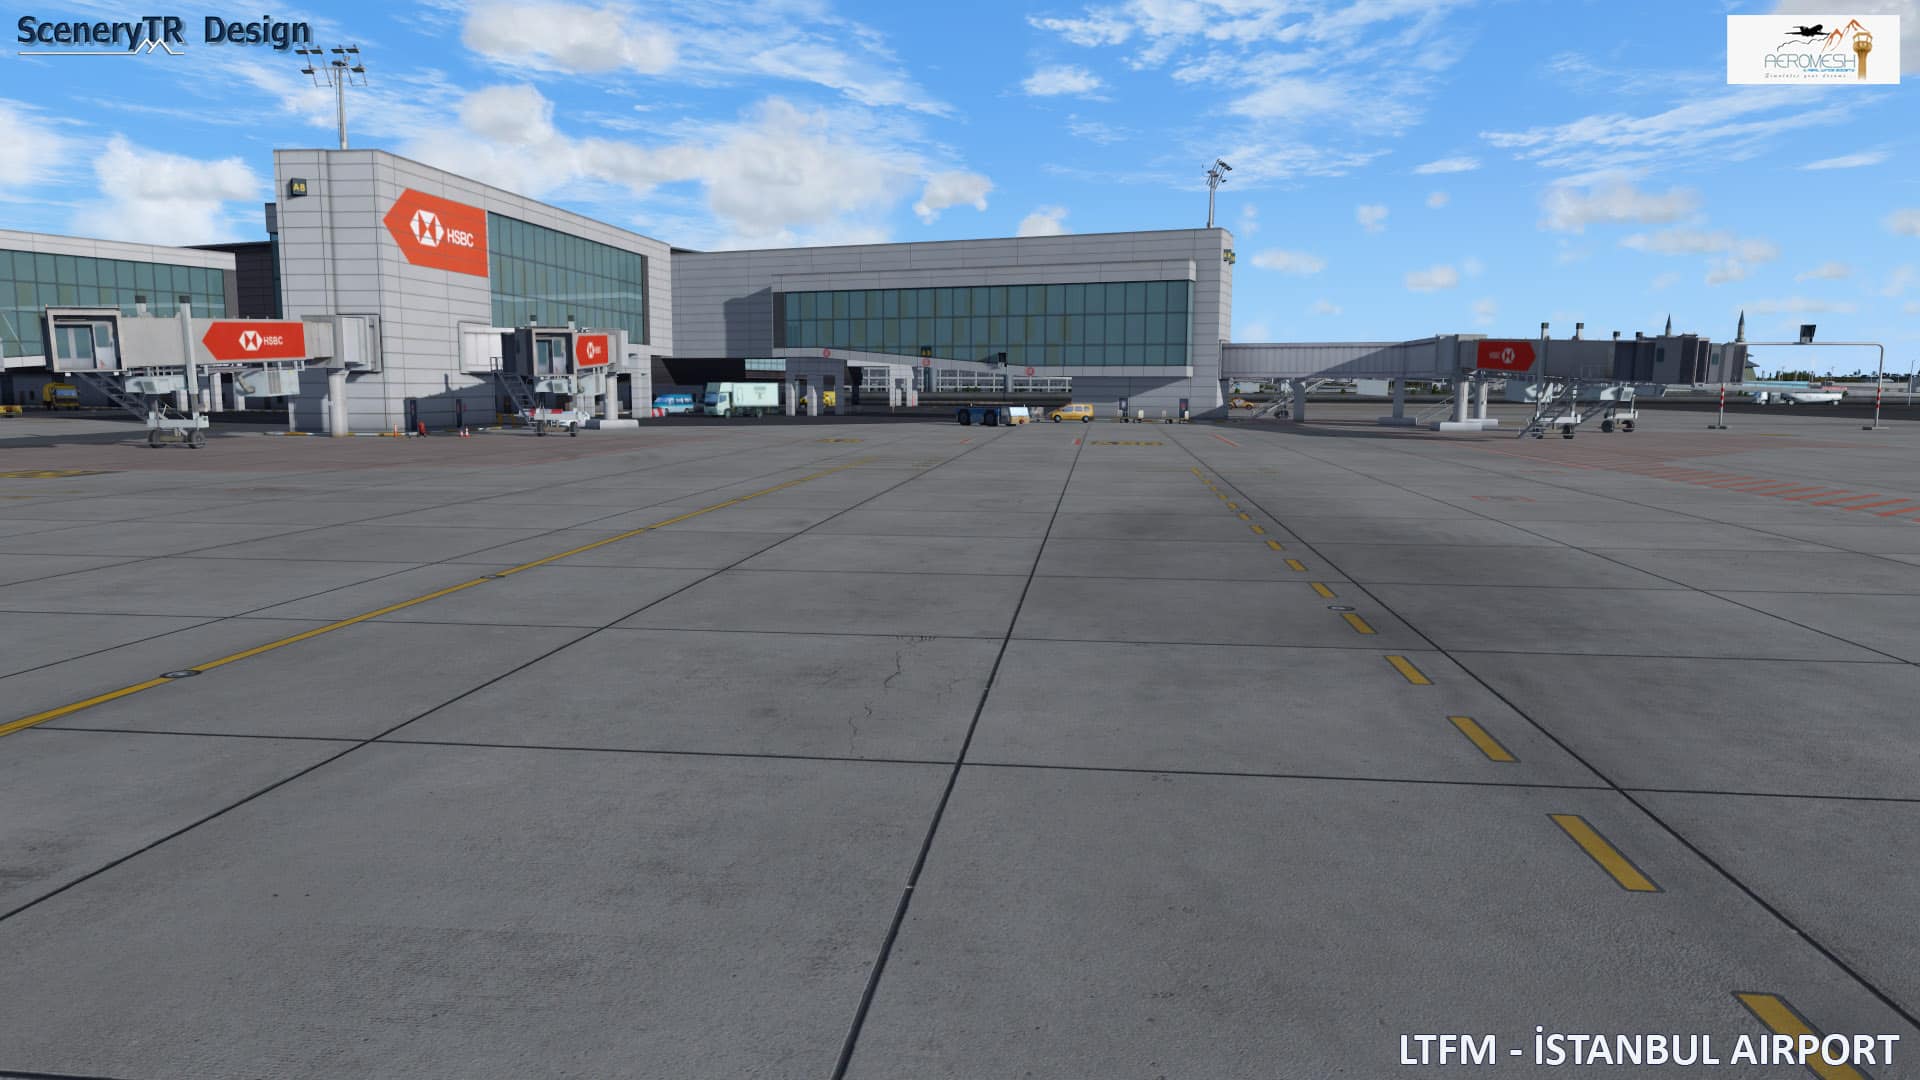 SceneryTR Releases Istanbul Airport for P3D - SceneryTR